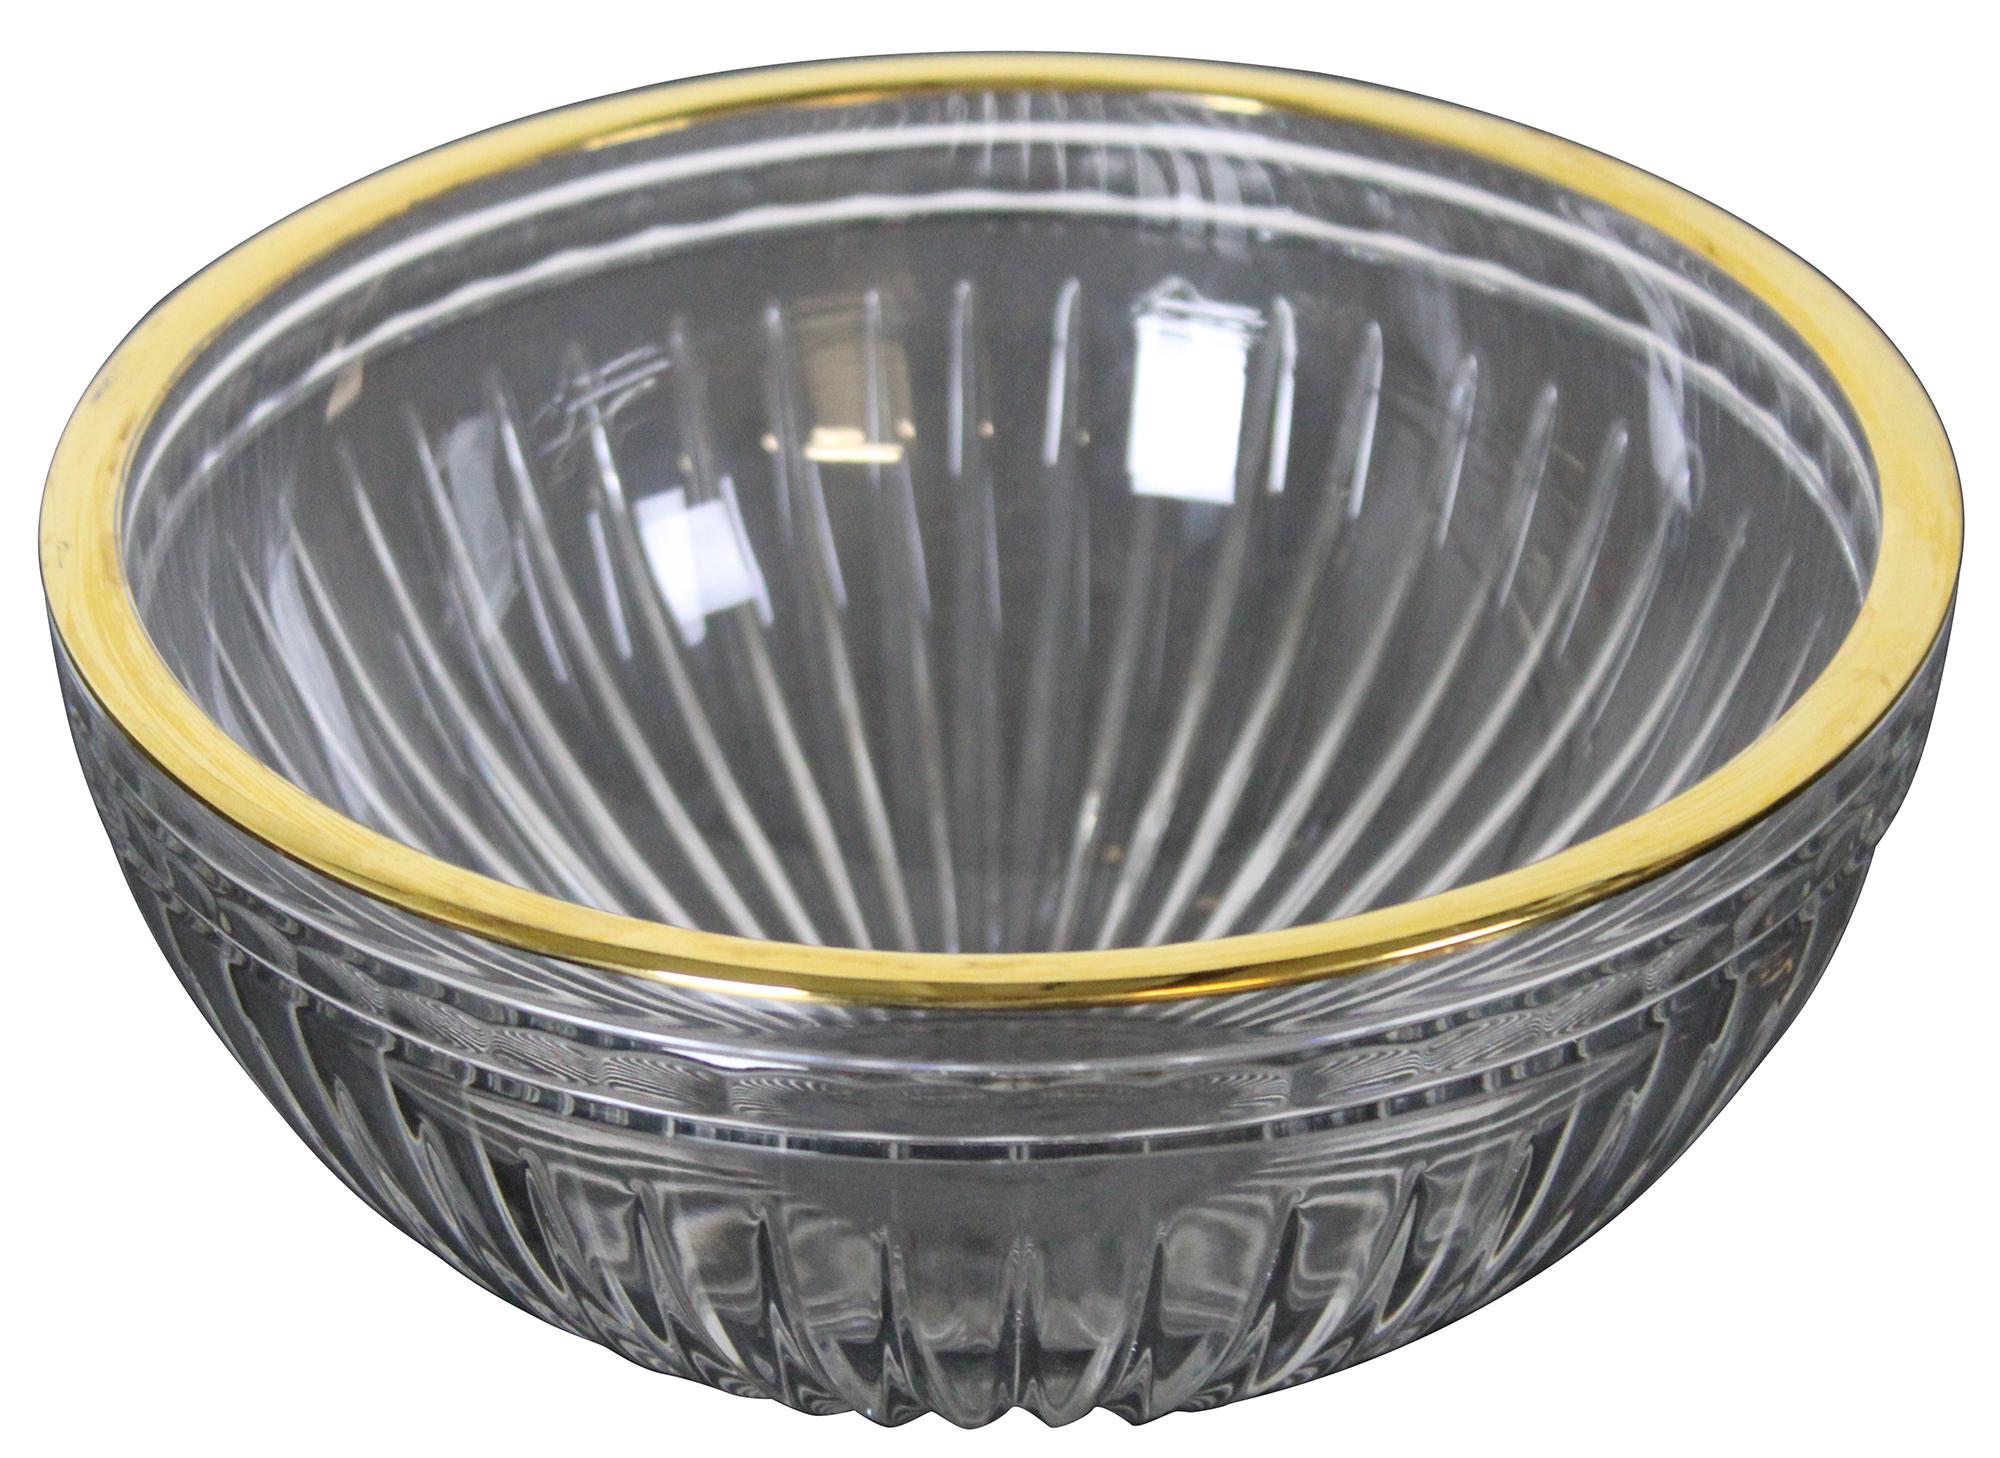 Vintage Hanover Marquis pattern bowl by Waterford. Features a gold rim and vertical cut. Marquis crystal is manufactured by the Waterford Crystal Company in Waterford, Ireland, and also in Germany and Slovenia. The Hanover gold pattern is a pattern